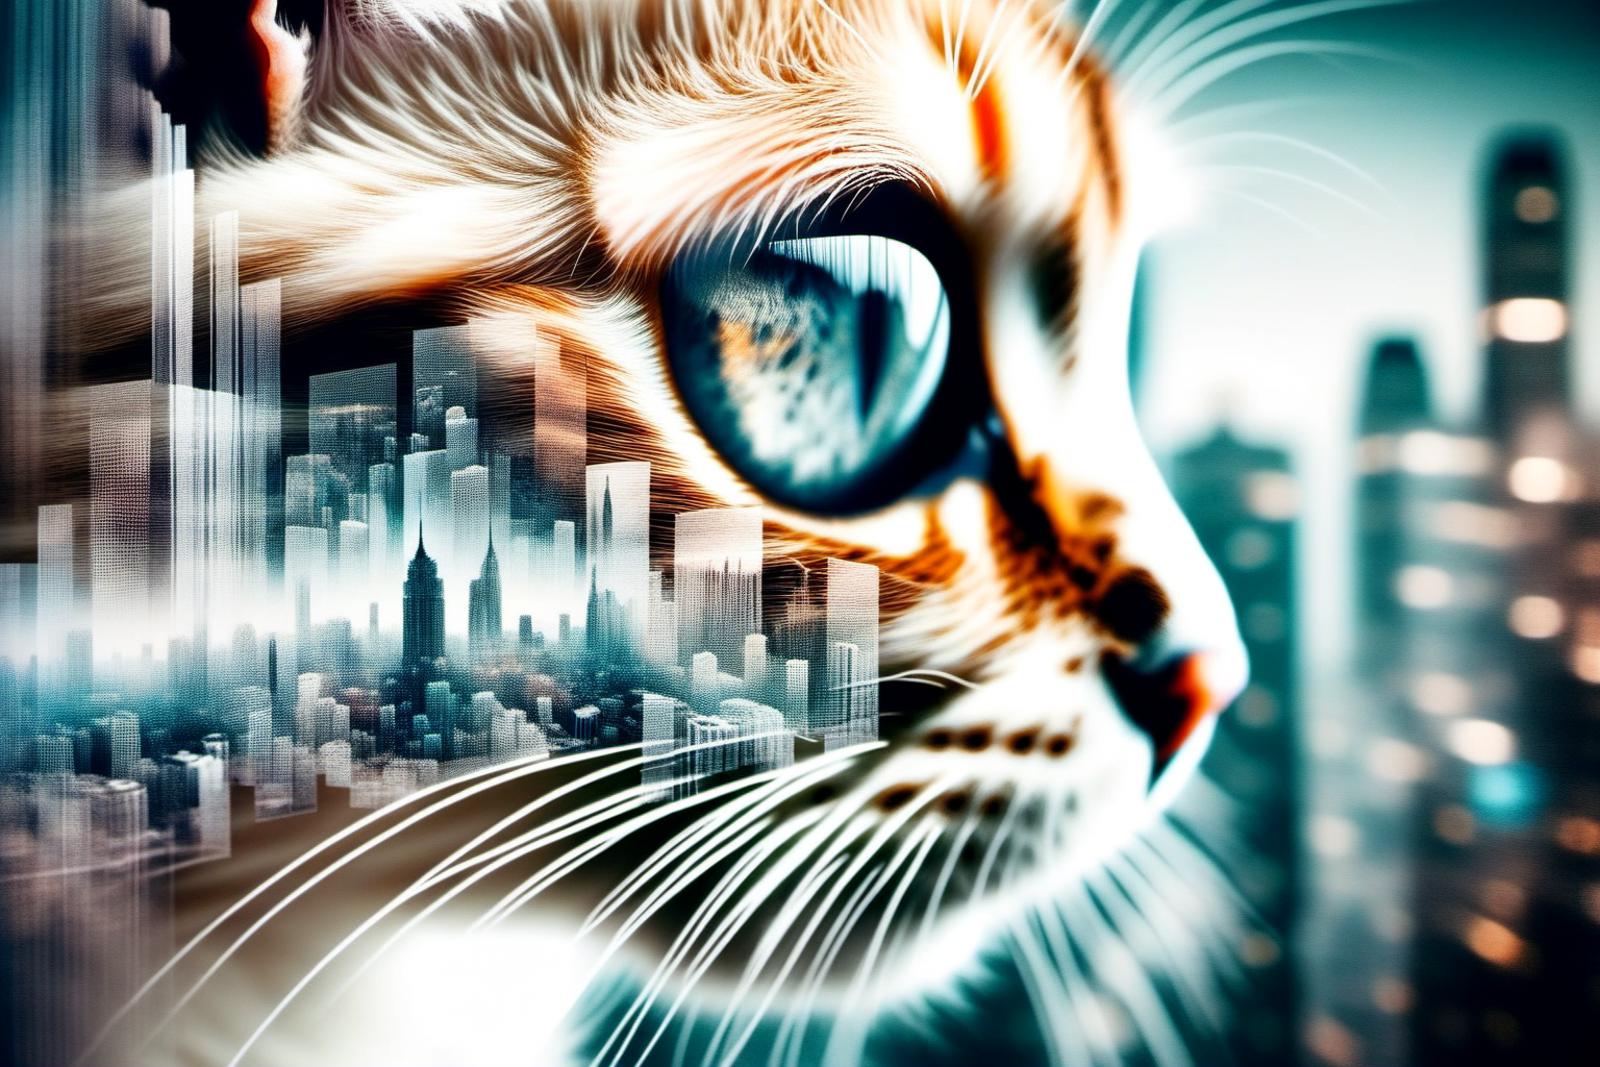 A cat's eye with a city skyline in the background.